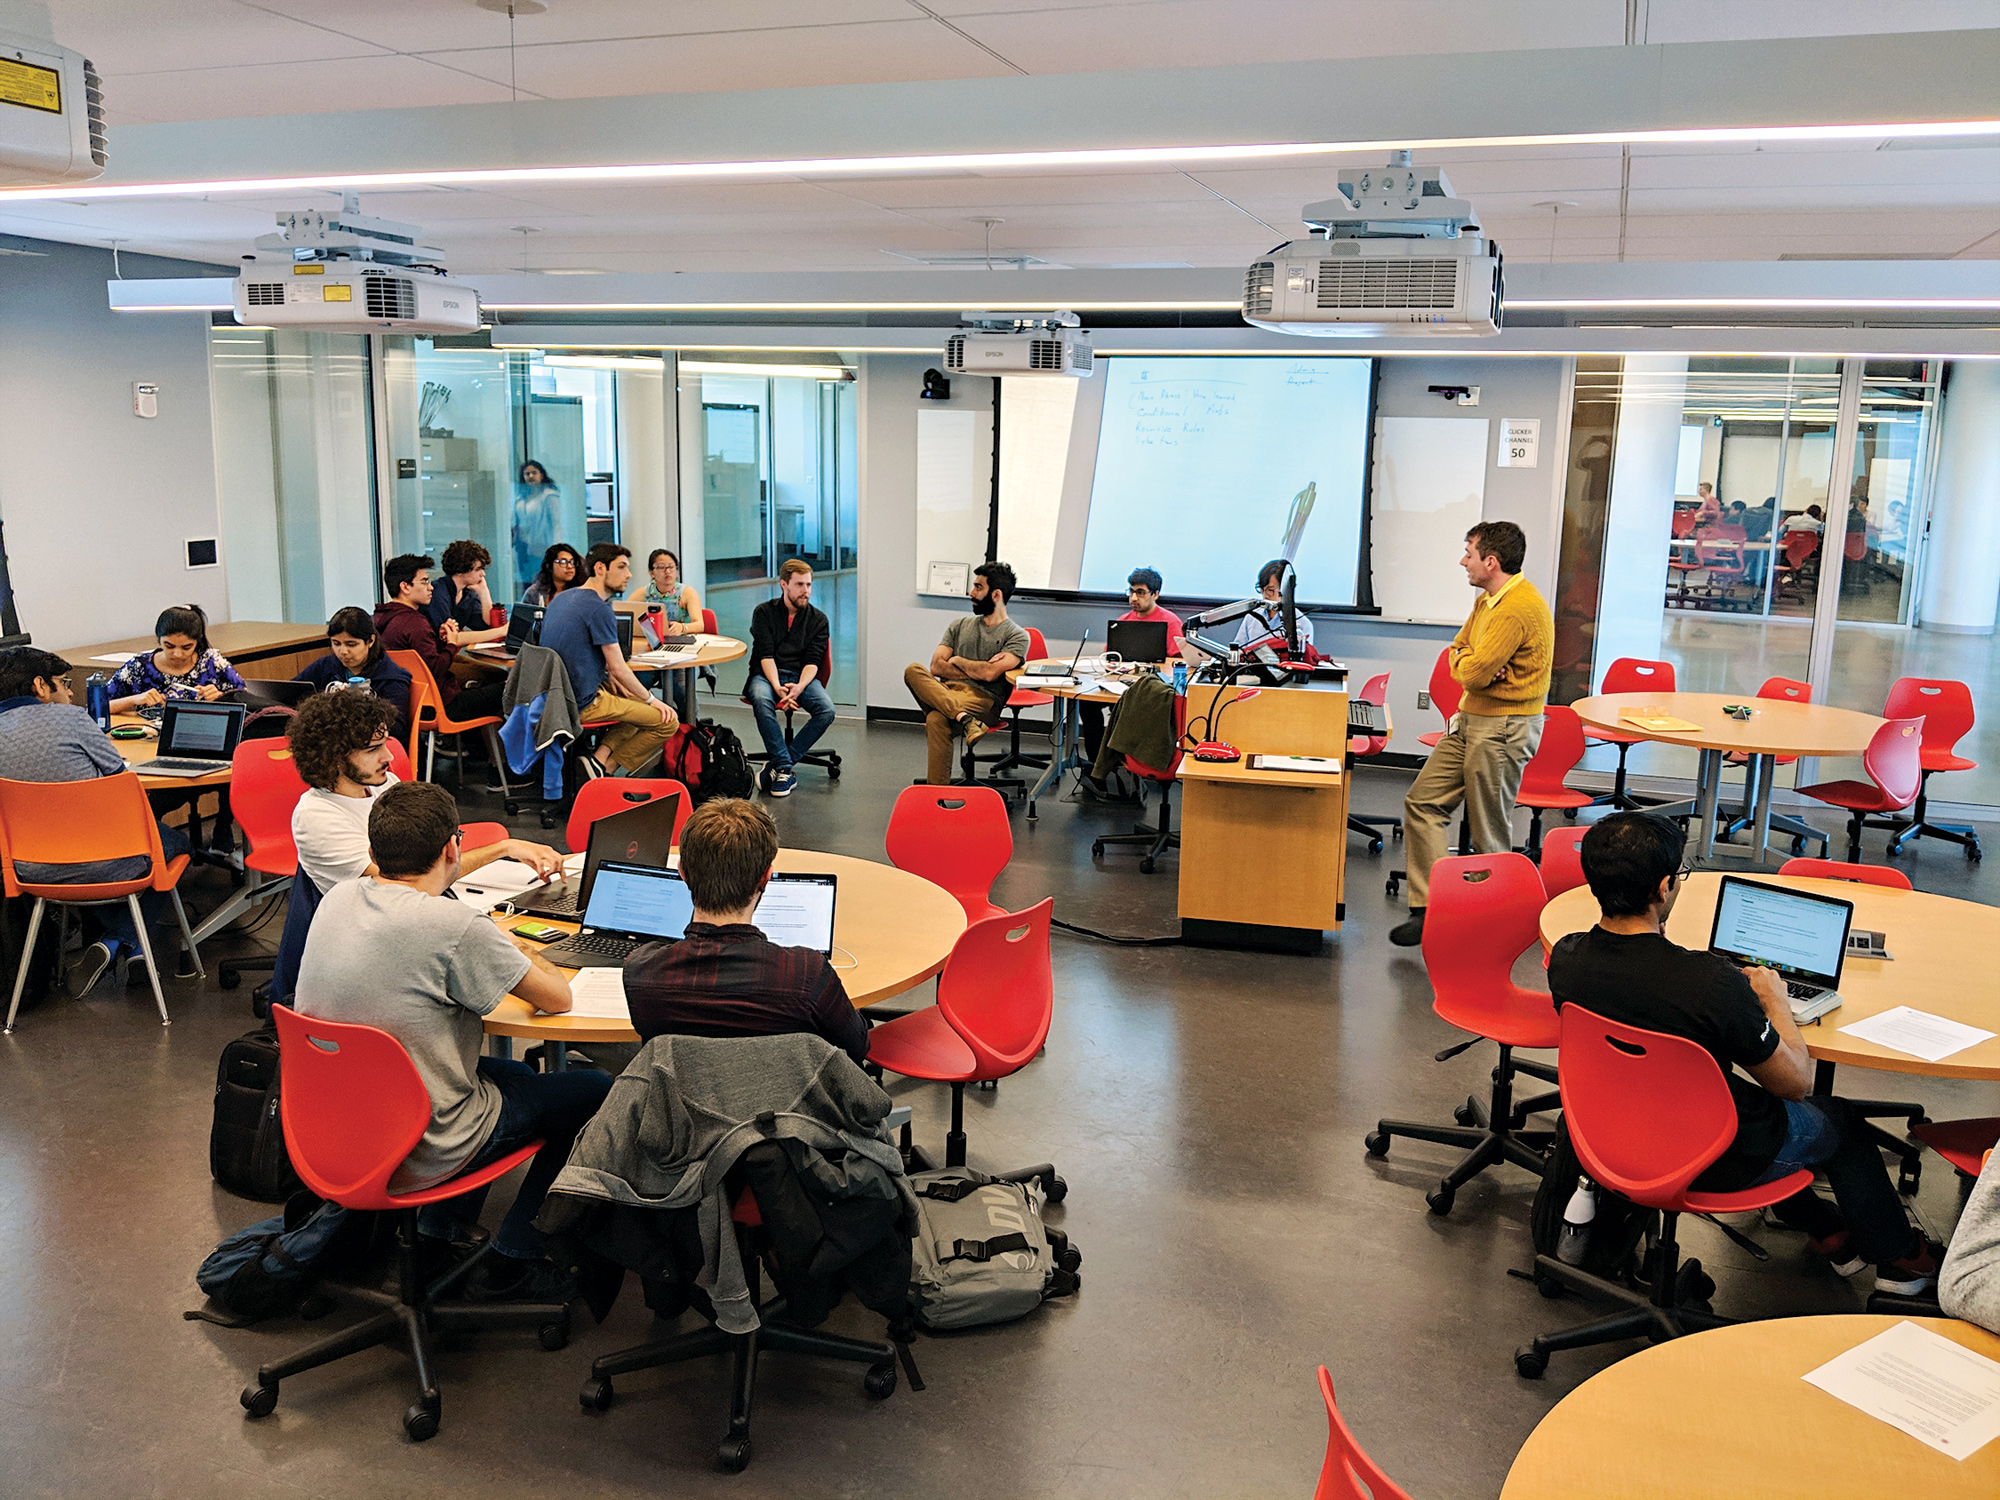 One of the Brendan Iribe Center's collaborative classrooms. It has modern styling, a glass wall and high ceilings, and students are sitting install groups at round tables.